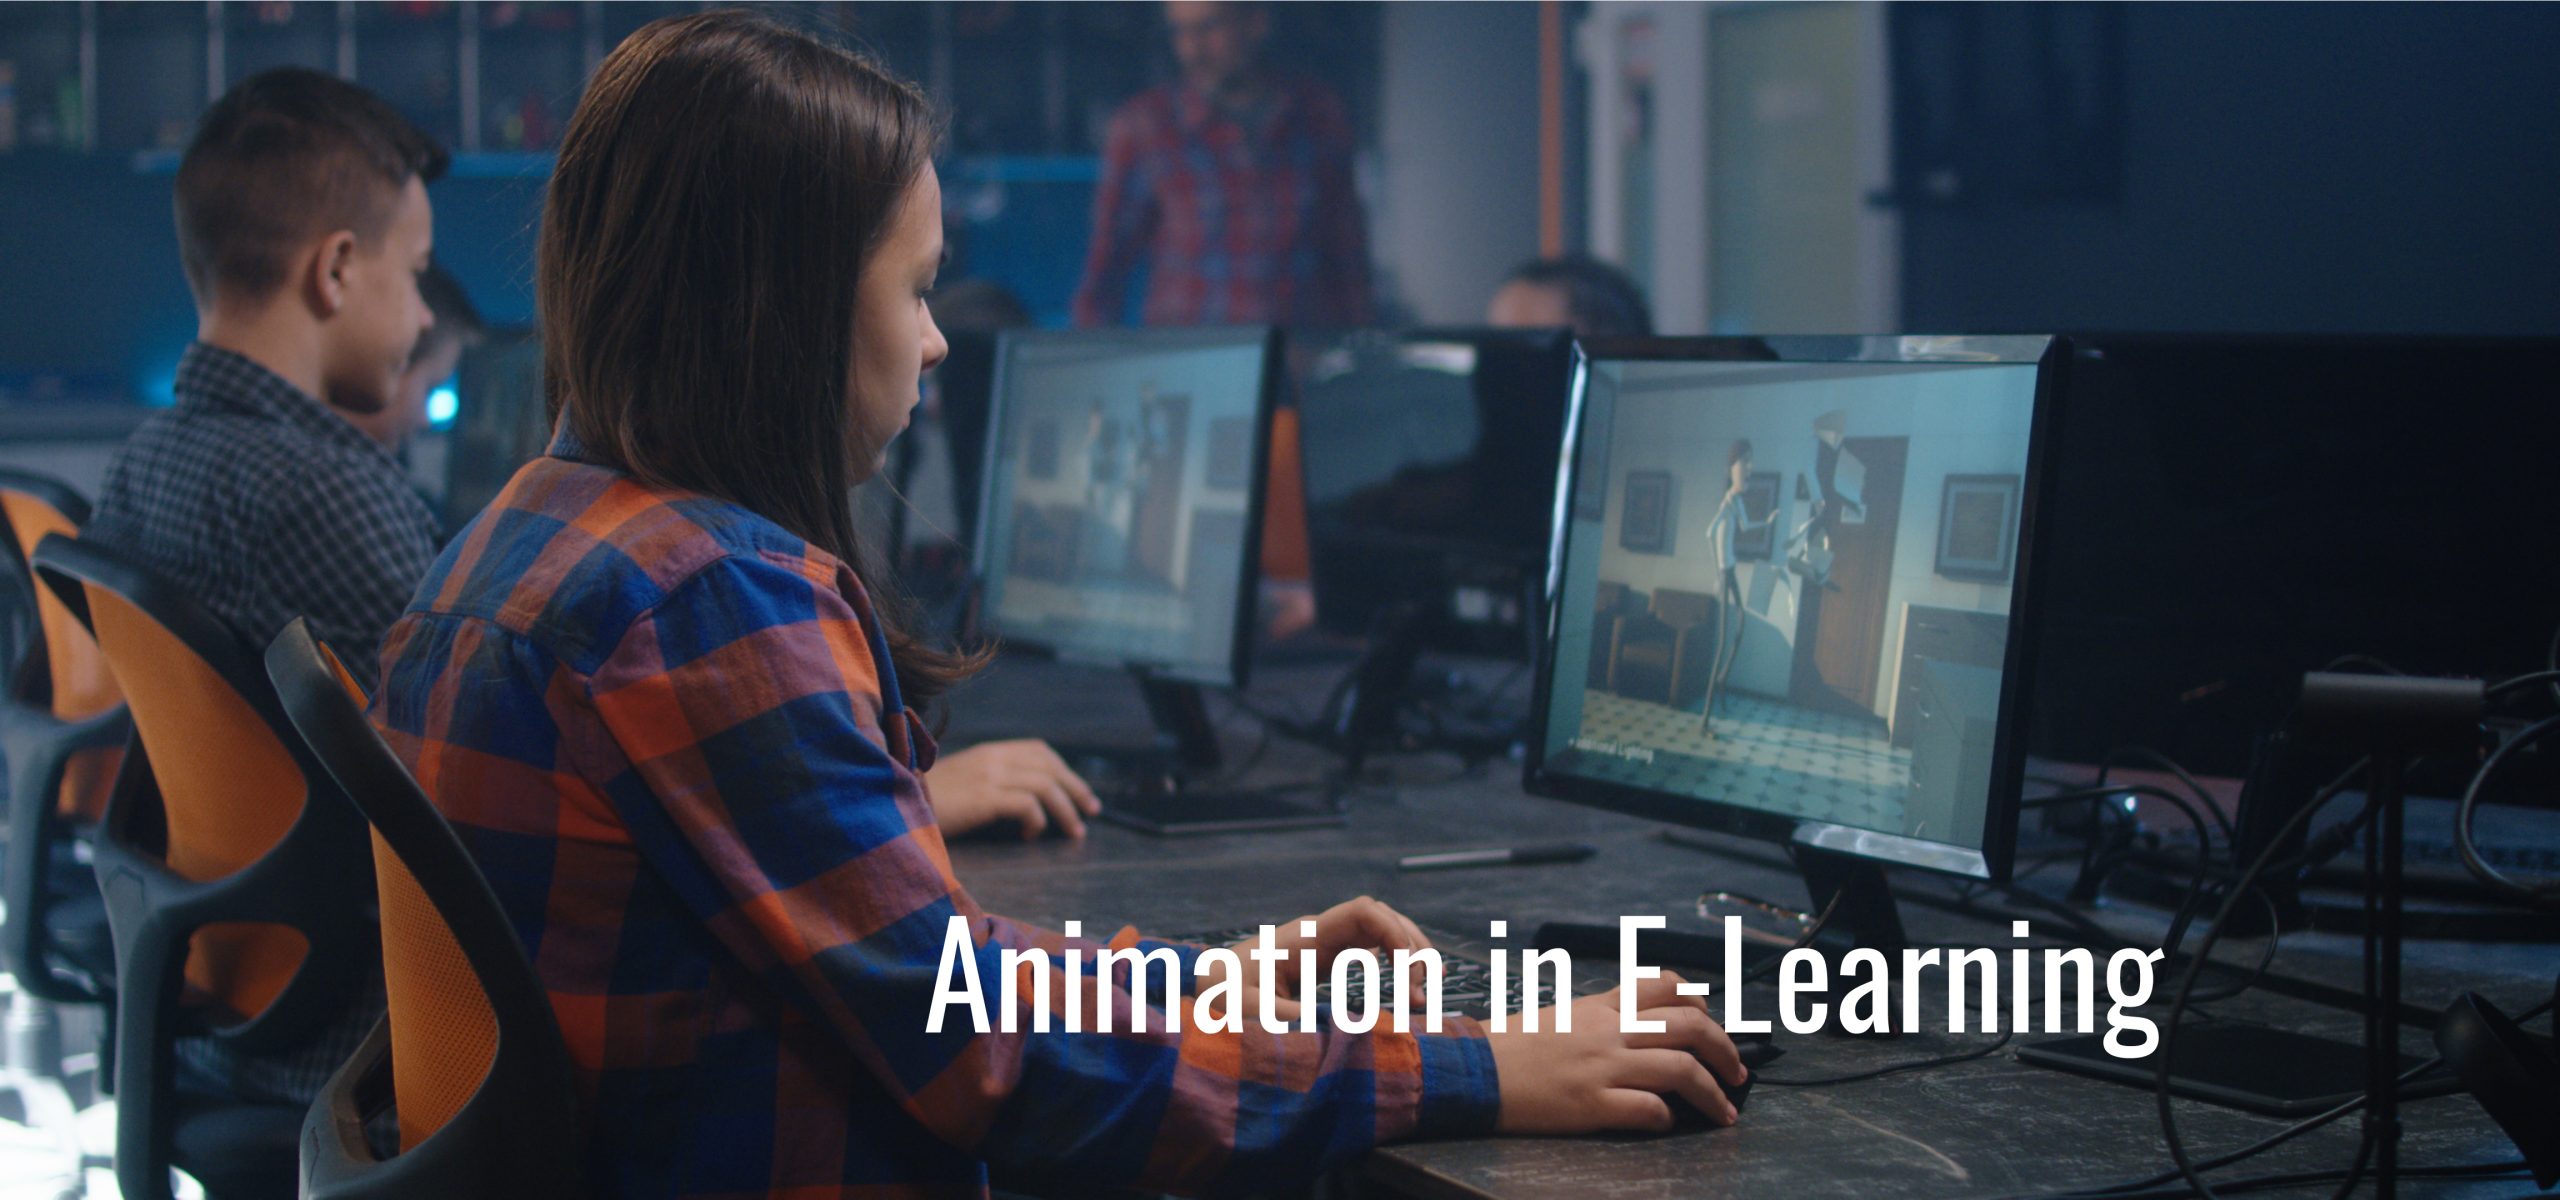 Benefits of Using Animation in E-Learning - Capytech